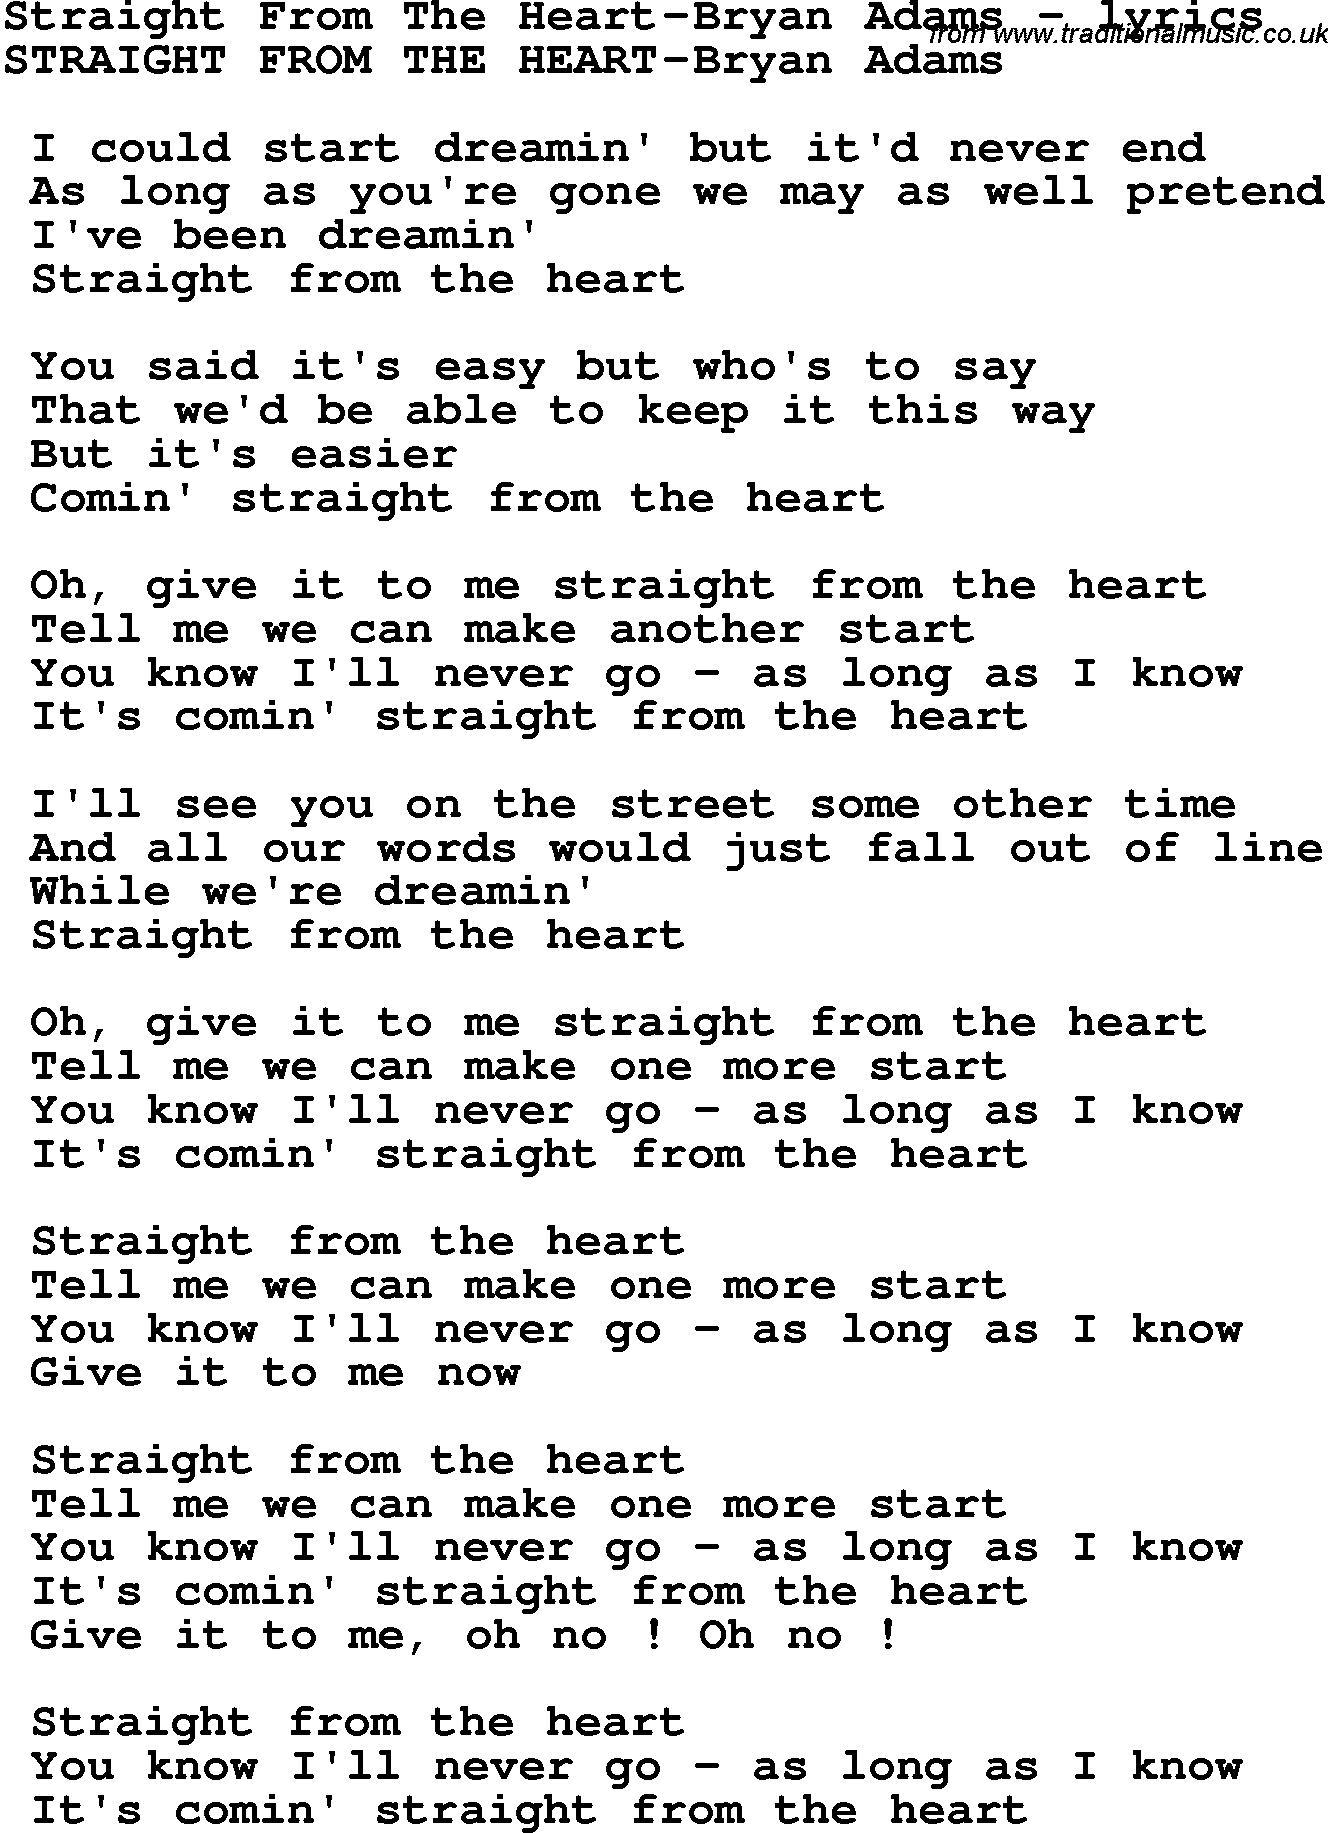 Love Song Lyrics for: Straight From The Heart-Bryan Adams